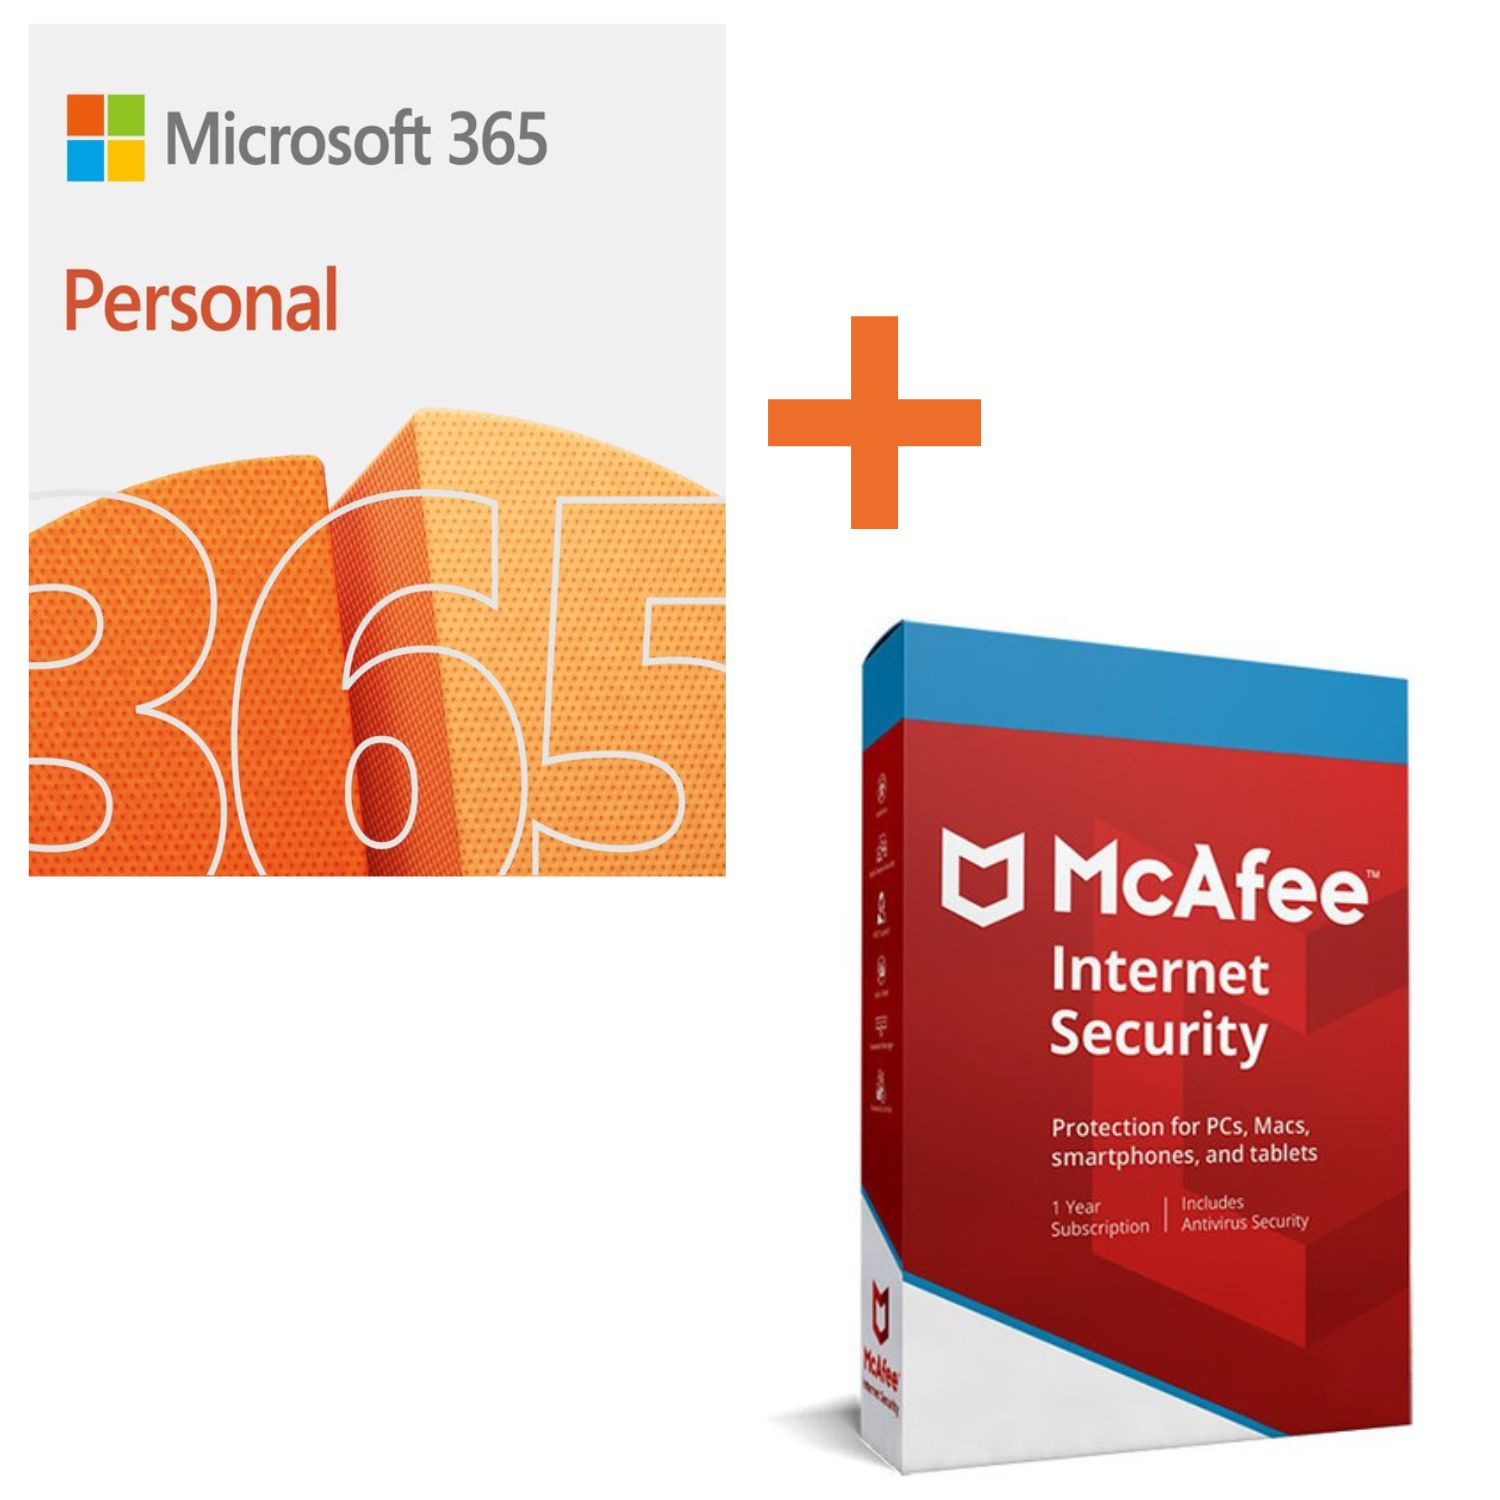 PROMO: Office 365 Personal + Mcafee Int Security 5PC (Digital)